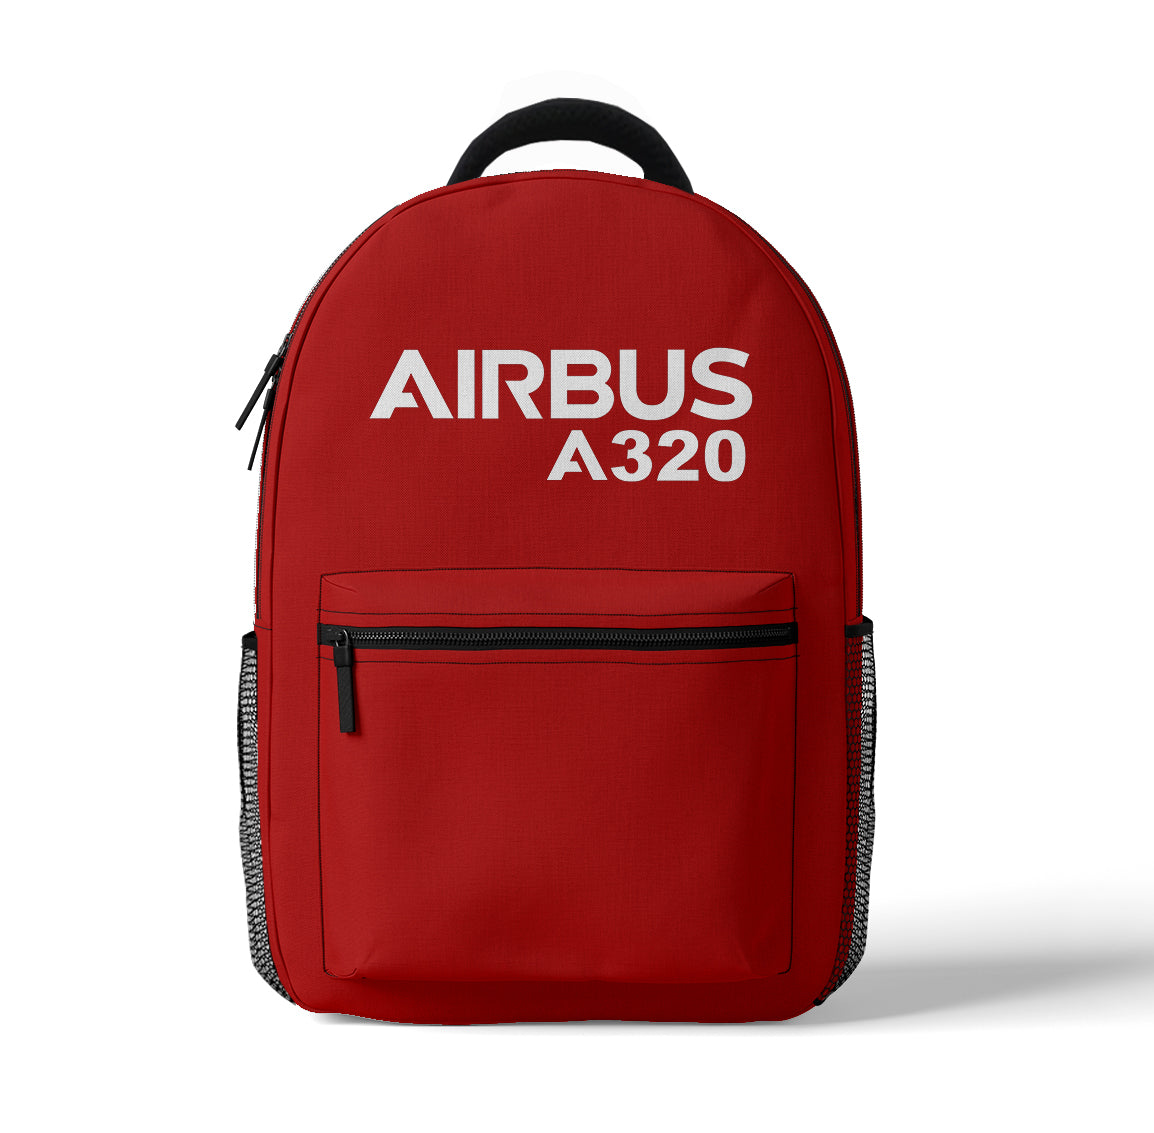 Airbus A320 & Text Designed 3D Backpacks